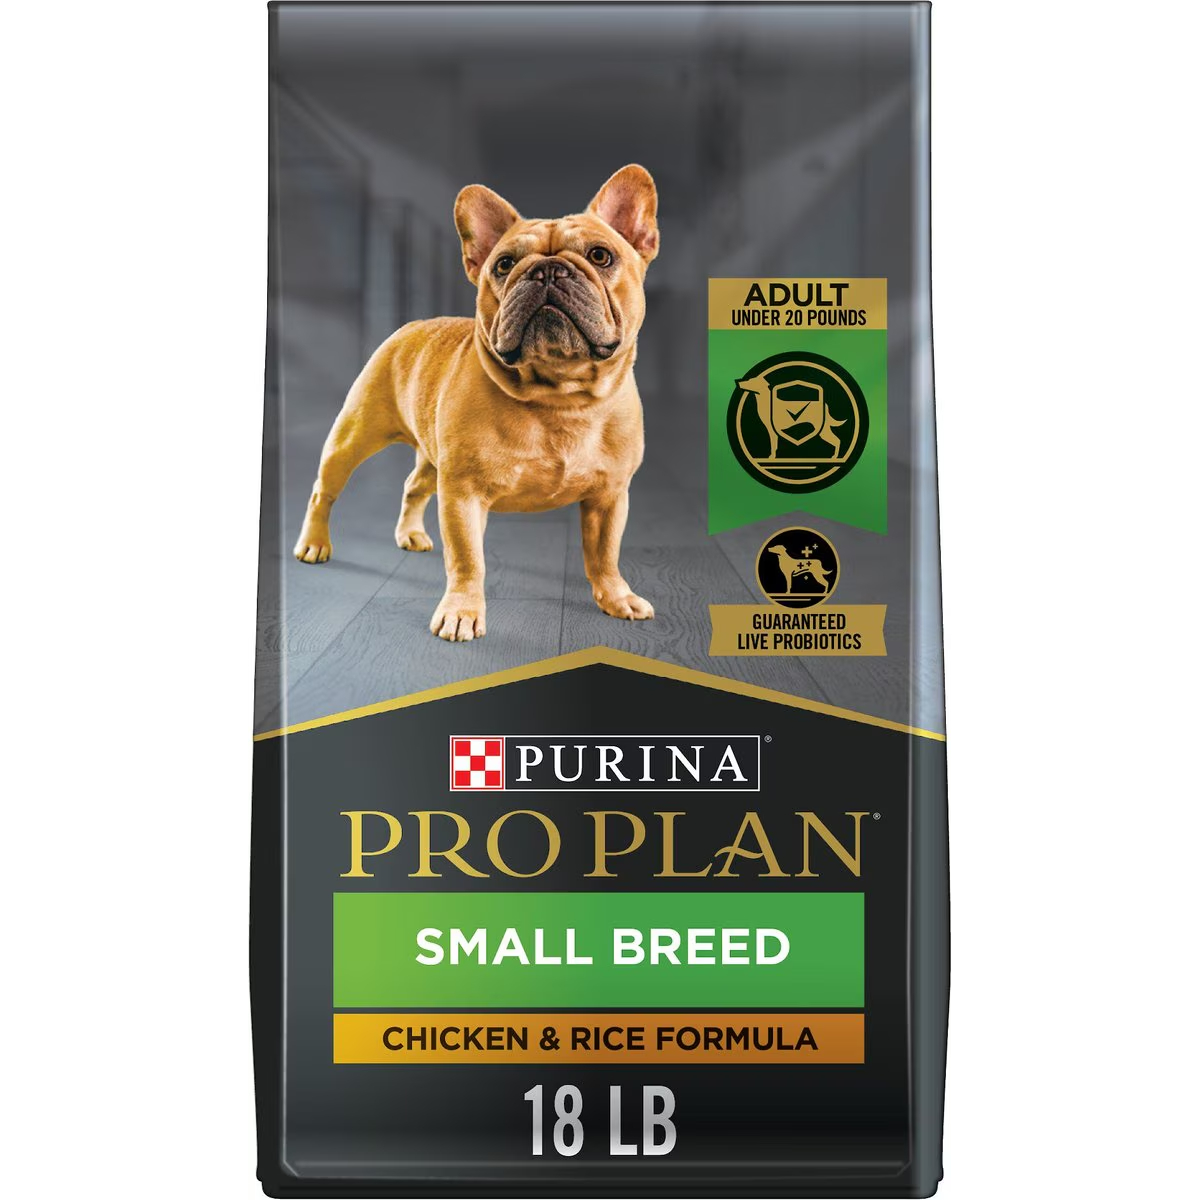 Purina Pro Plan Adult Small Breed Chicken & Rice Formula Dry Dog Food 